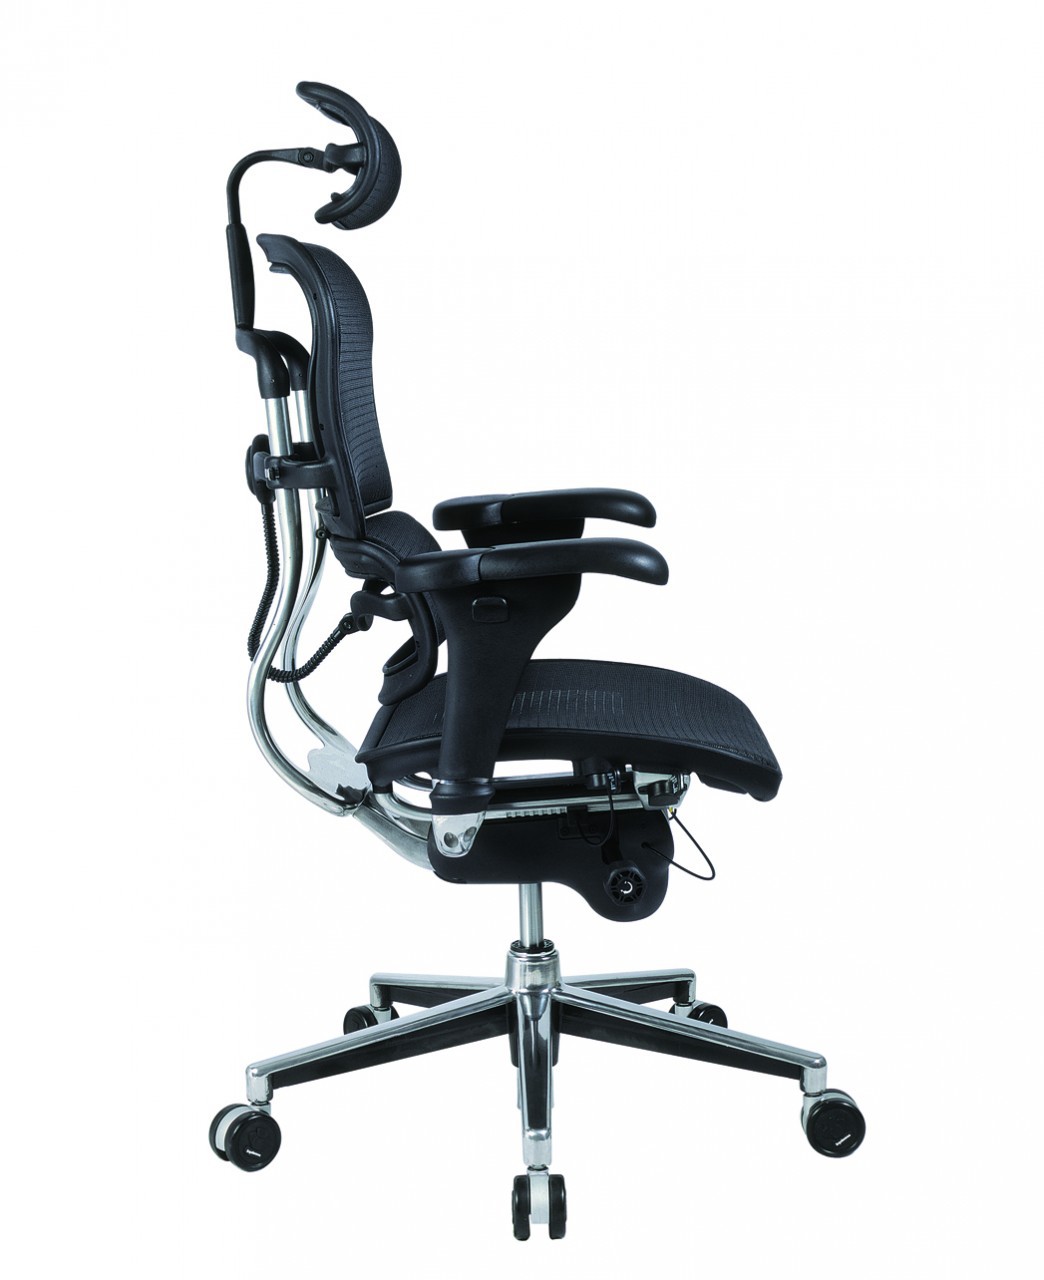 Orthopedic Chairs For Office Everything You Need To Know To Find An Office Chair Best Suited